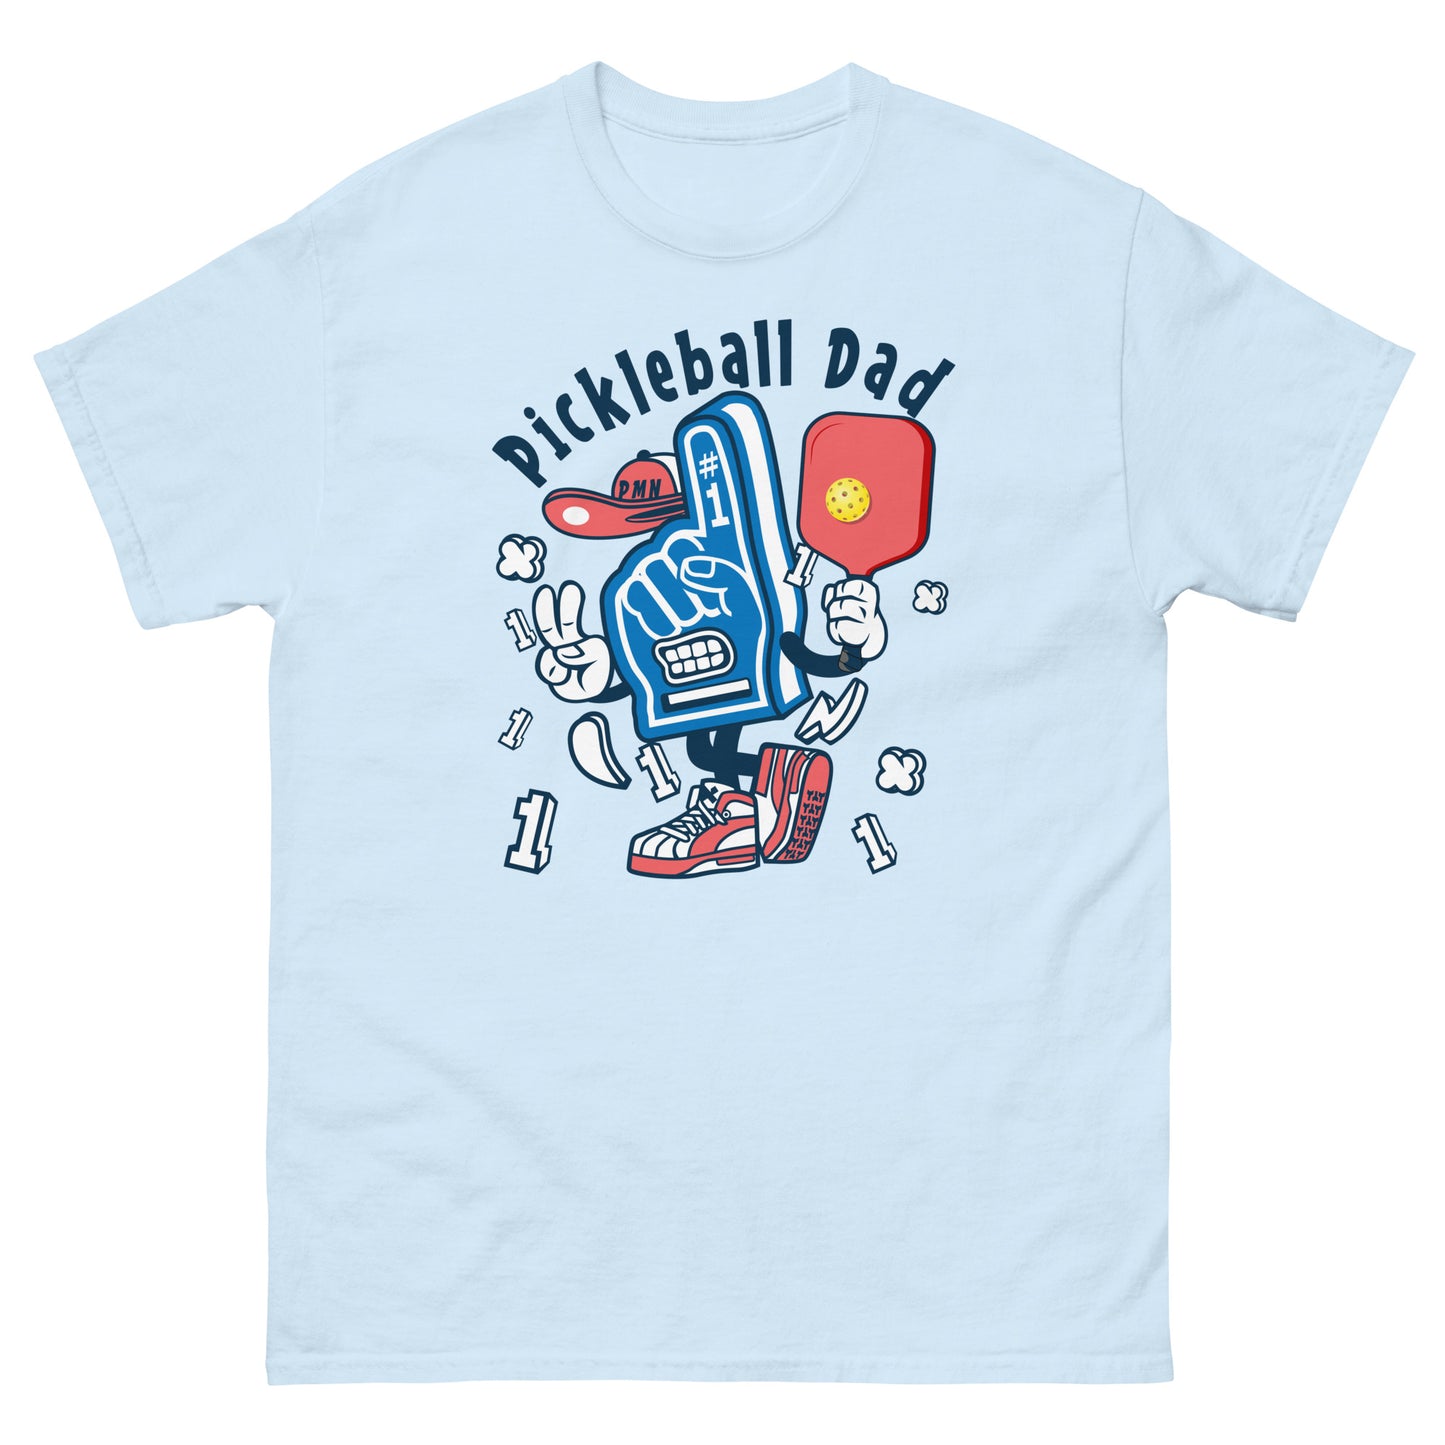 Retro Pickleball Pun: "Number One Pickleball Dad Glove", Father's Day Mens T-Shirt